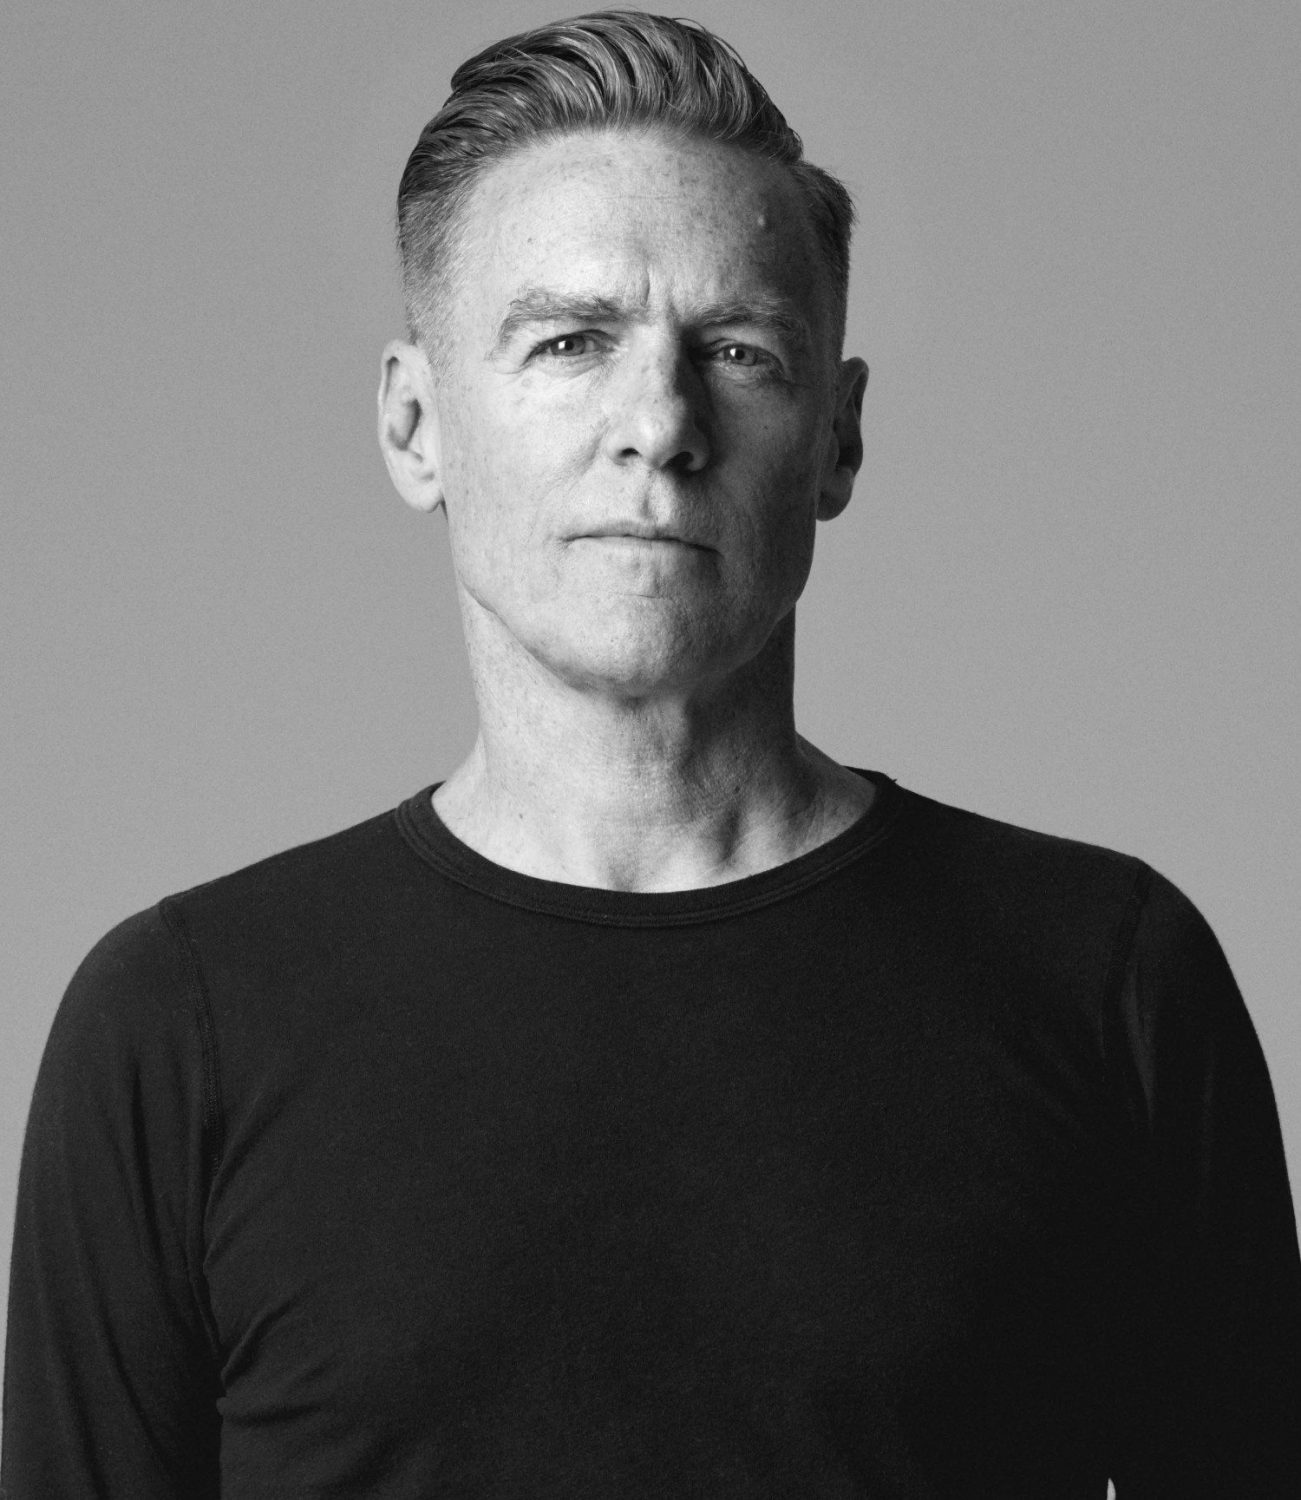 The legendary Bryan Adams talks latest “Get Up” album, Feb. 11 show at The Beacon Theatre, New York, and more